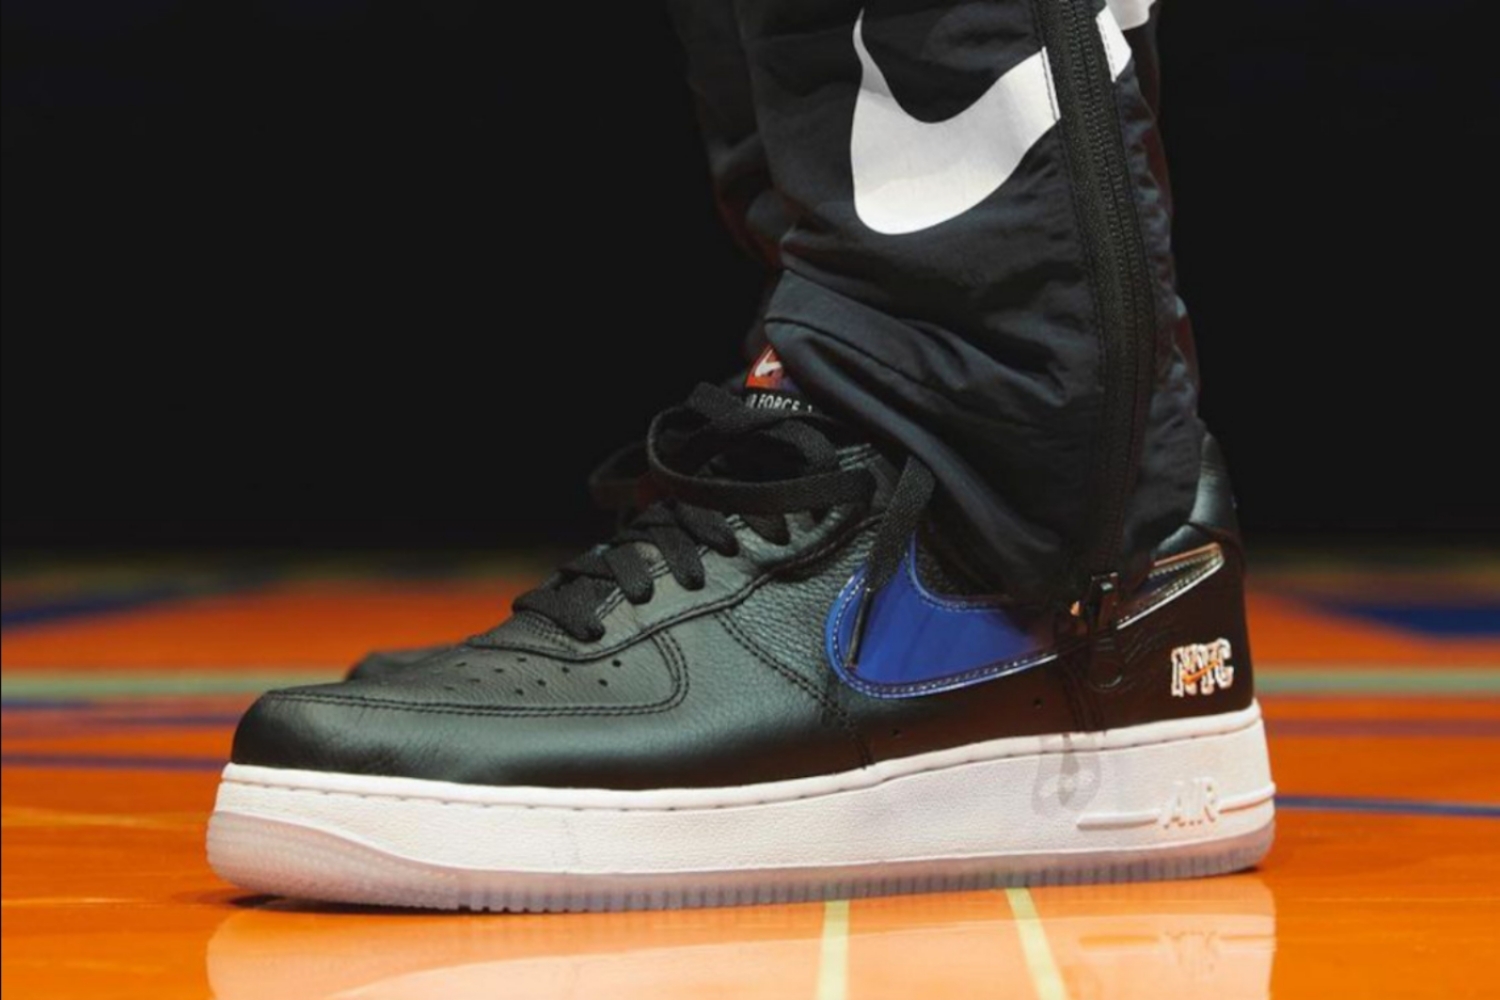 The Kith x Nike Air Force 1 Low 'Knicks' comes out at Christmas